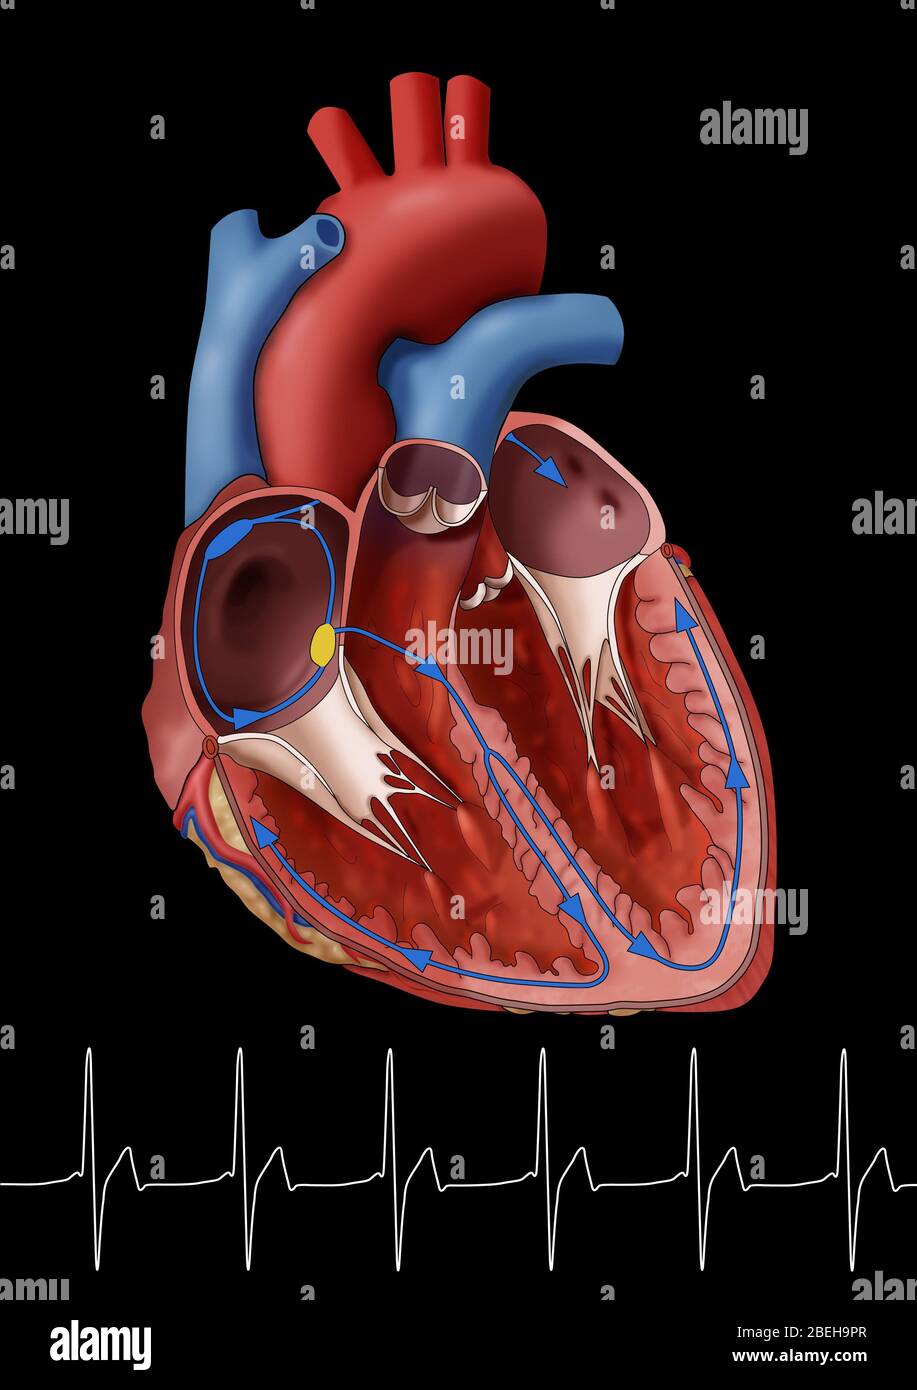 Normal Heart with EKG, Illustration Stock Photo